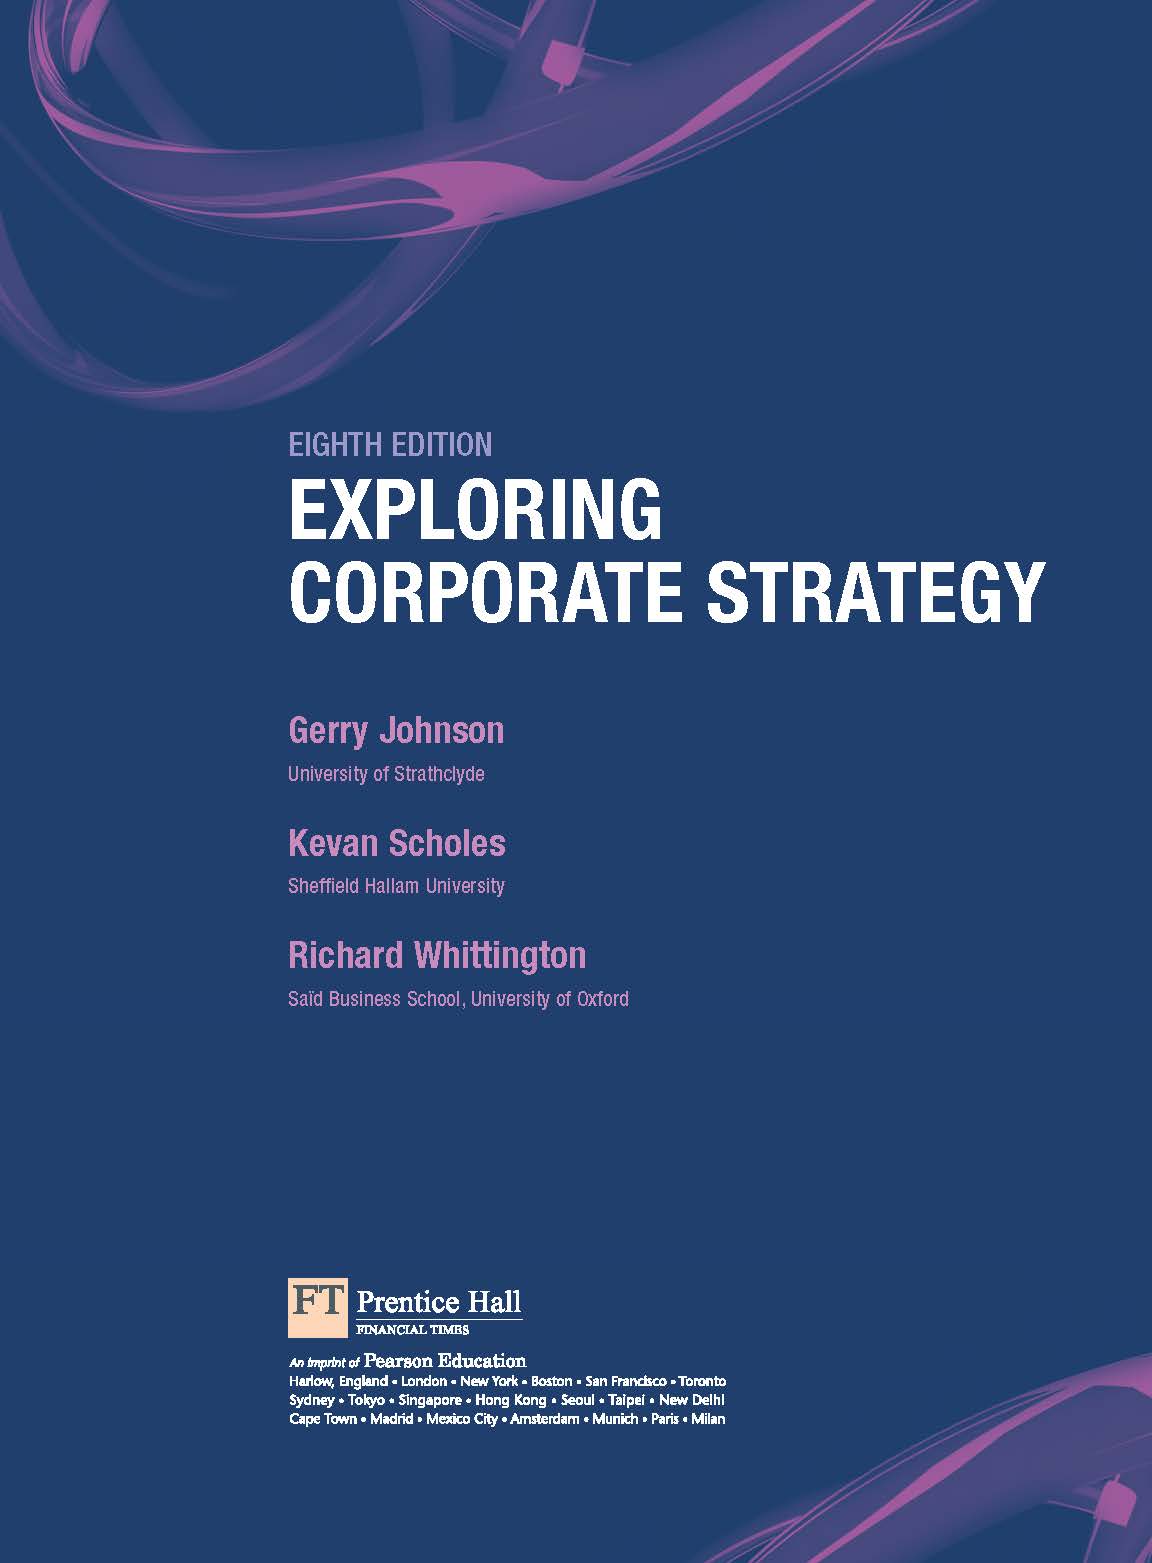 Exploring Corporate Strategy 8th_Page_001.jpg